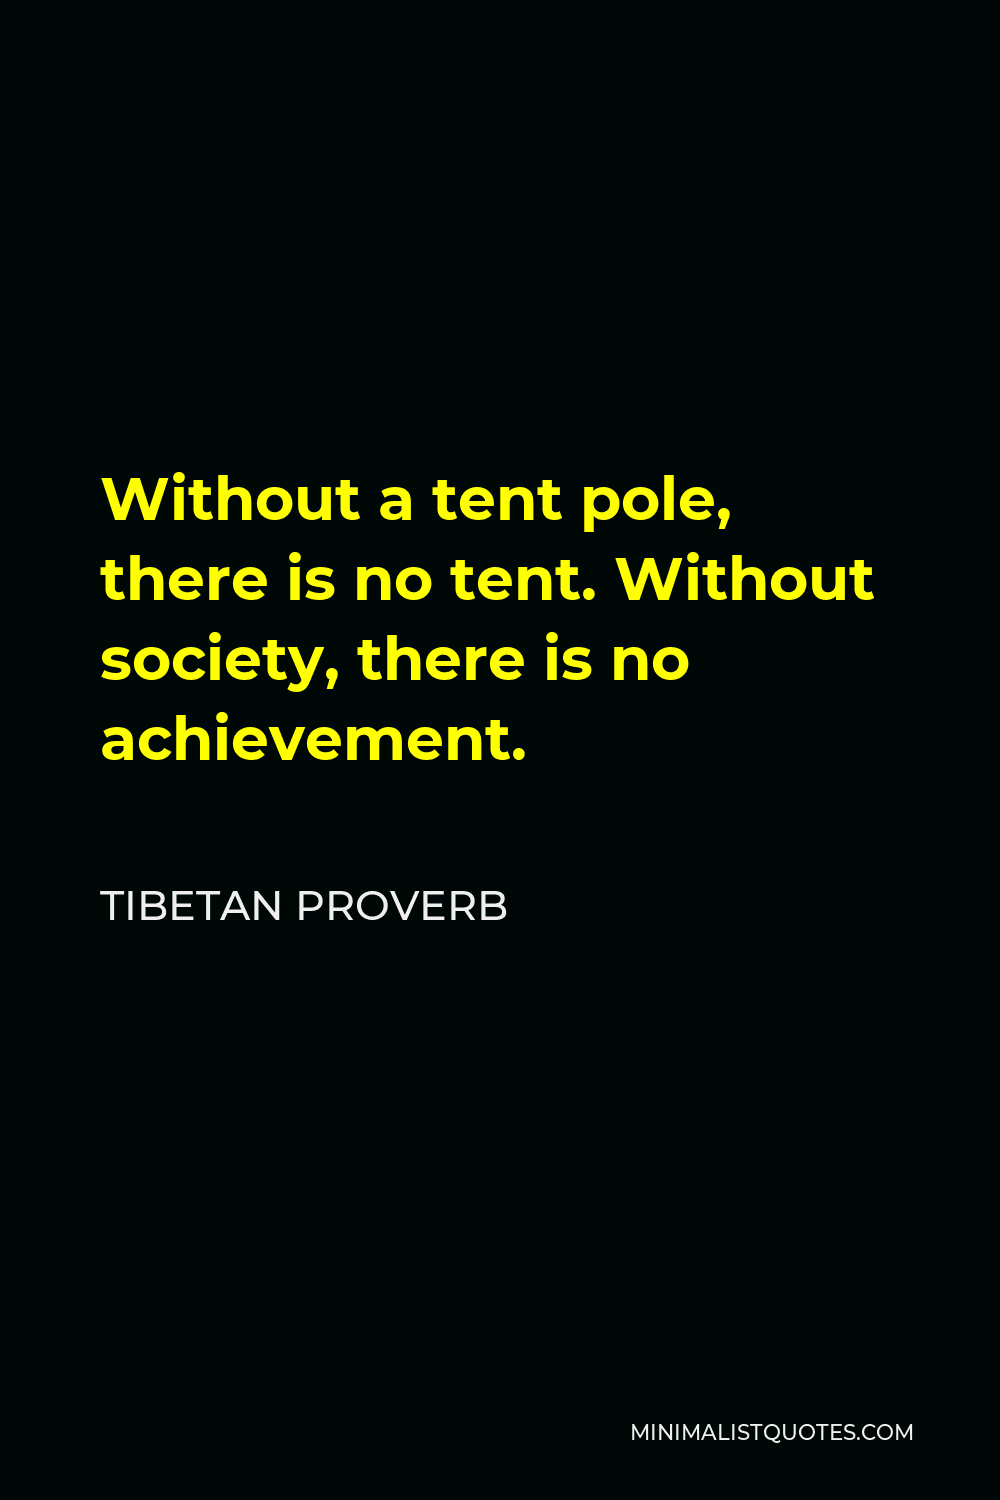 Tibetan Proverb Quote - Without a tent pole, there is no tent. Without society, there is no achievement.